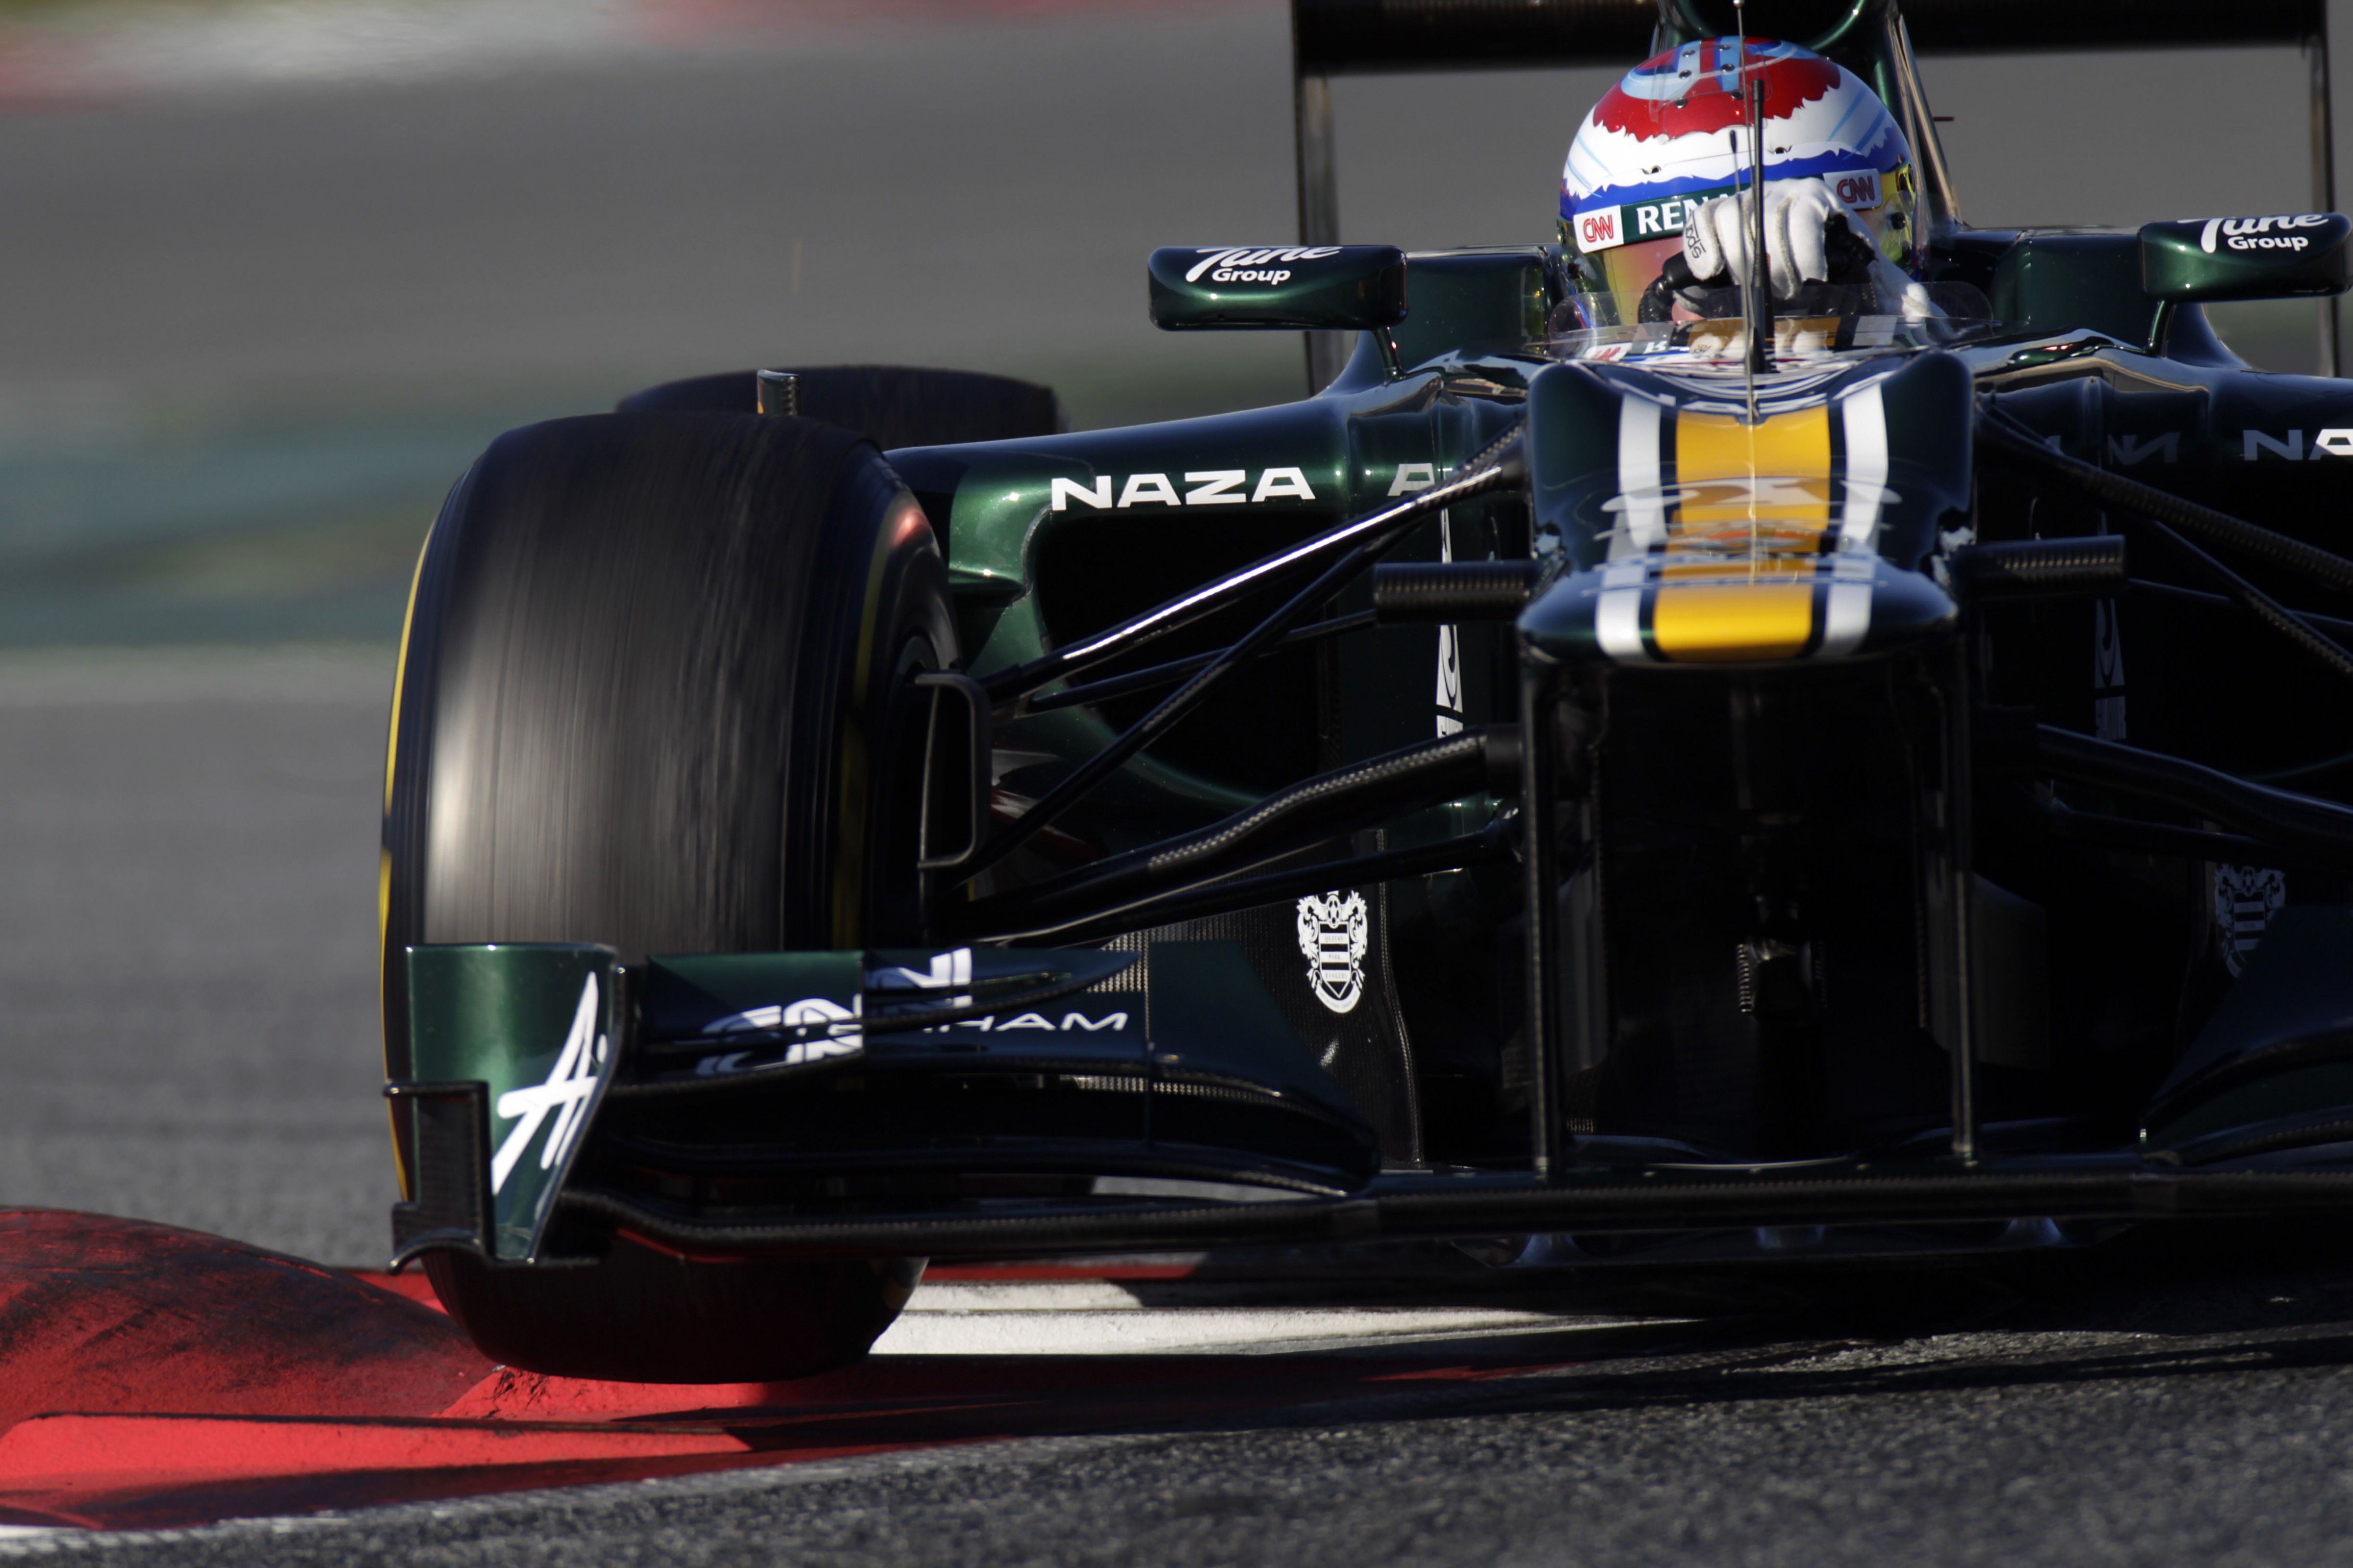 f1 2012 game free download for pc full version